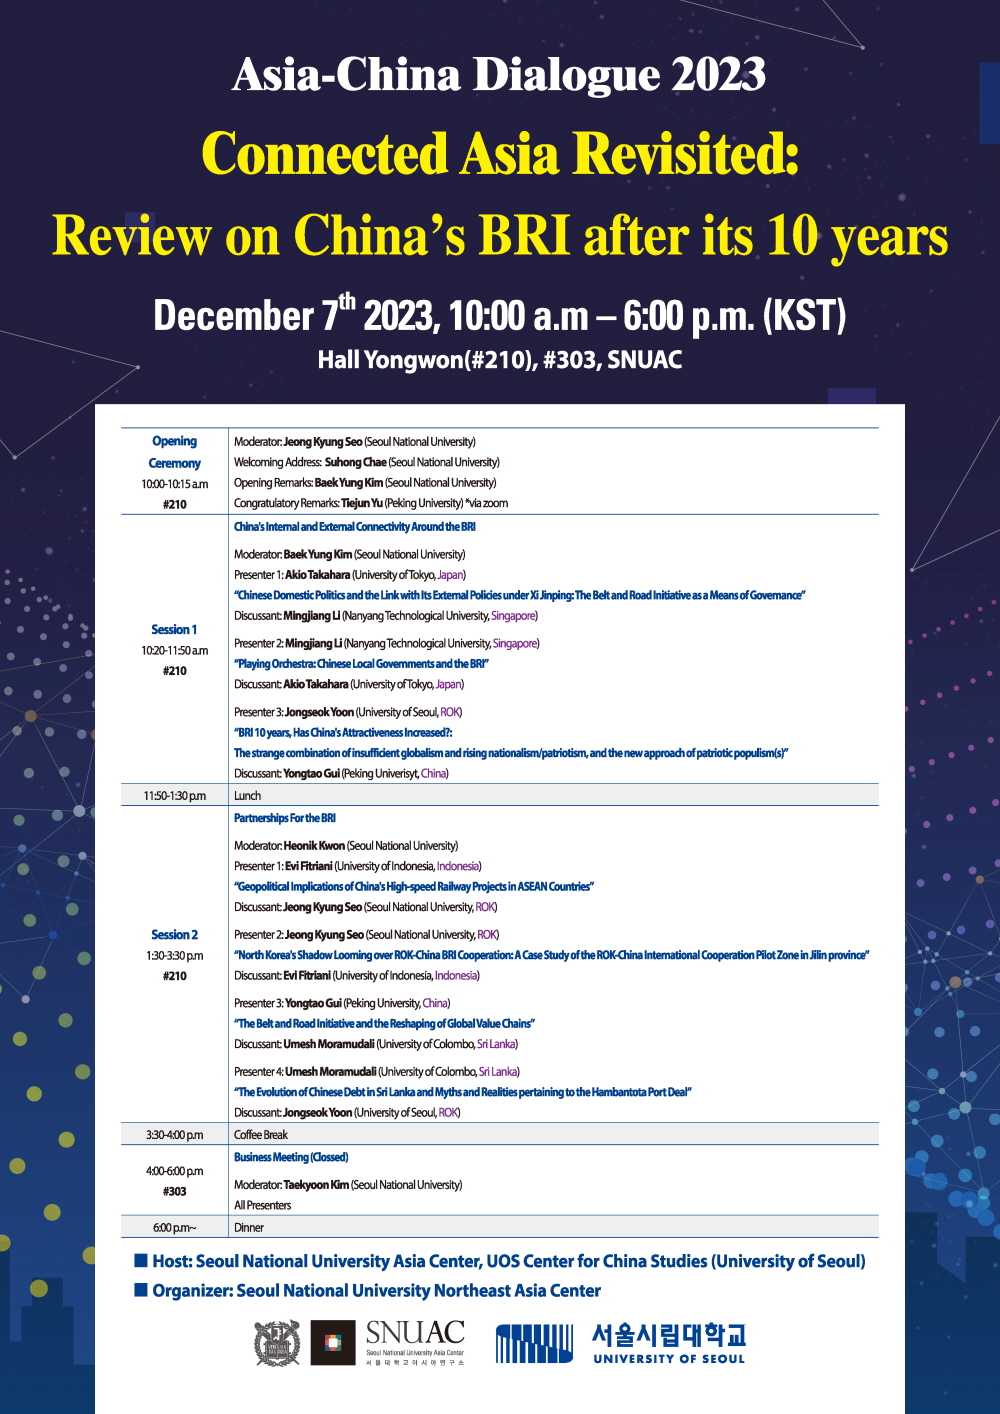 Connected Asia Revisited: Review on China’s BRI after its 10 years